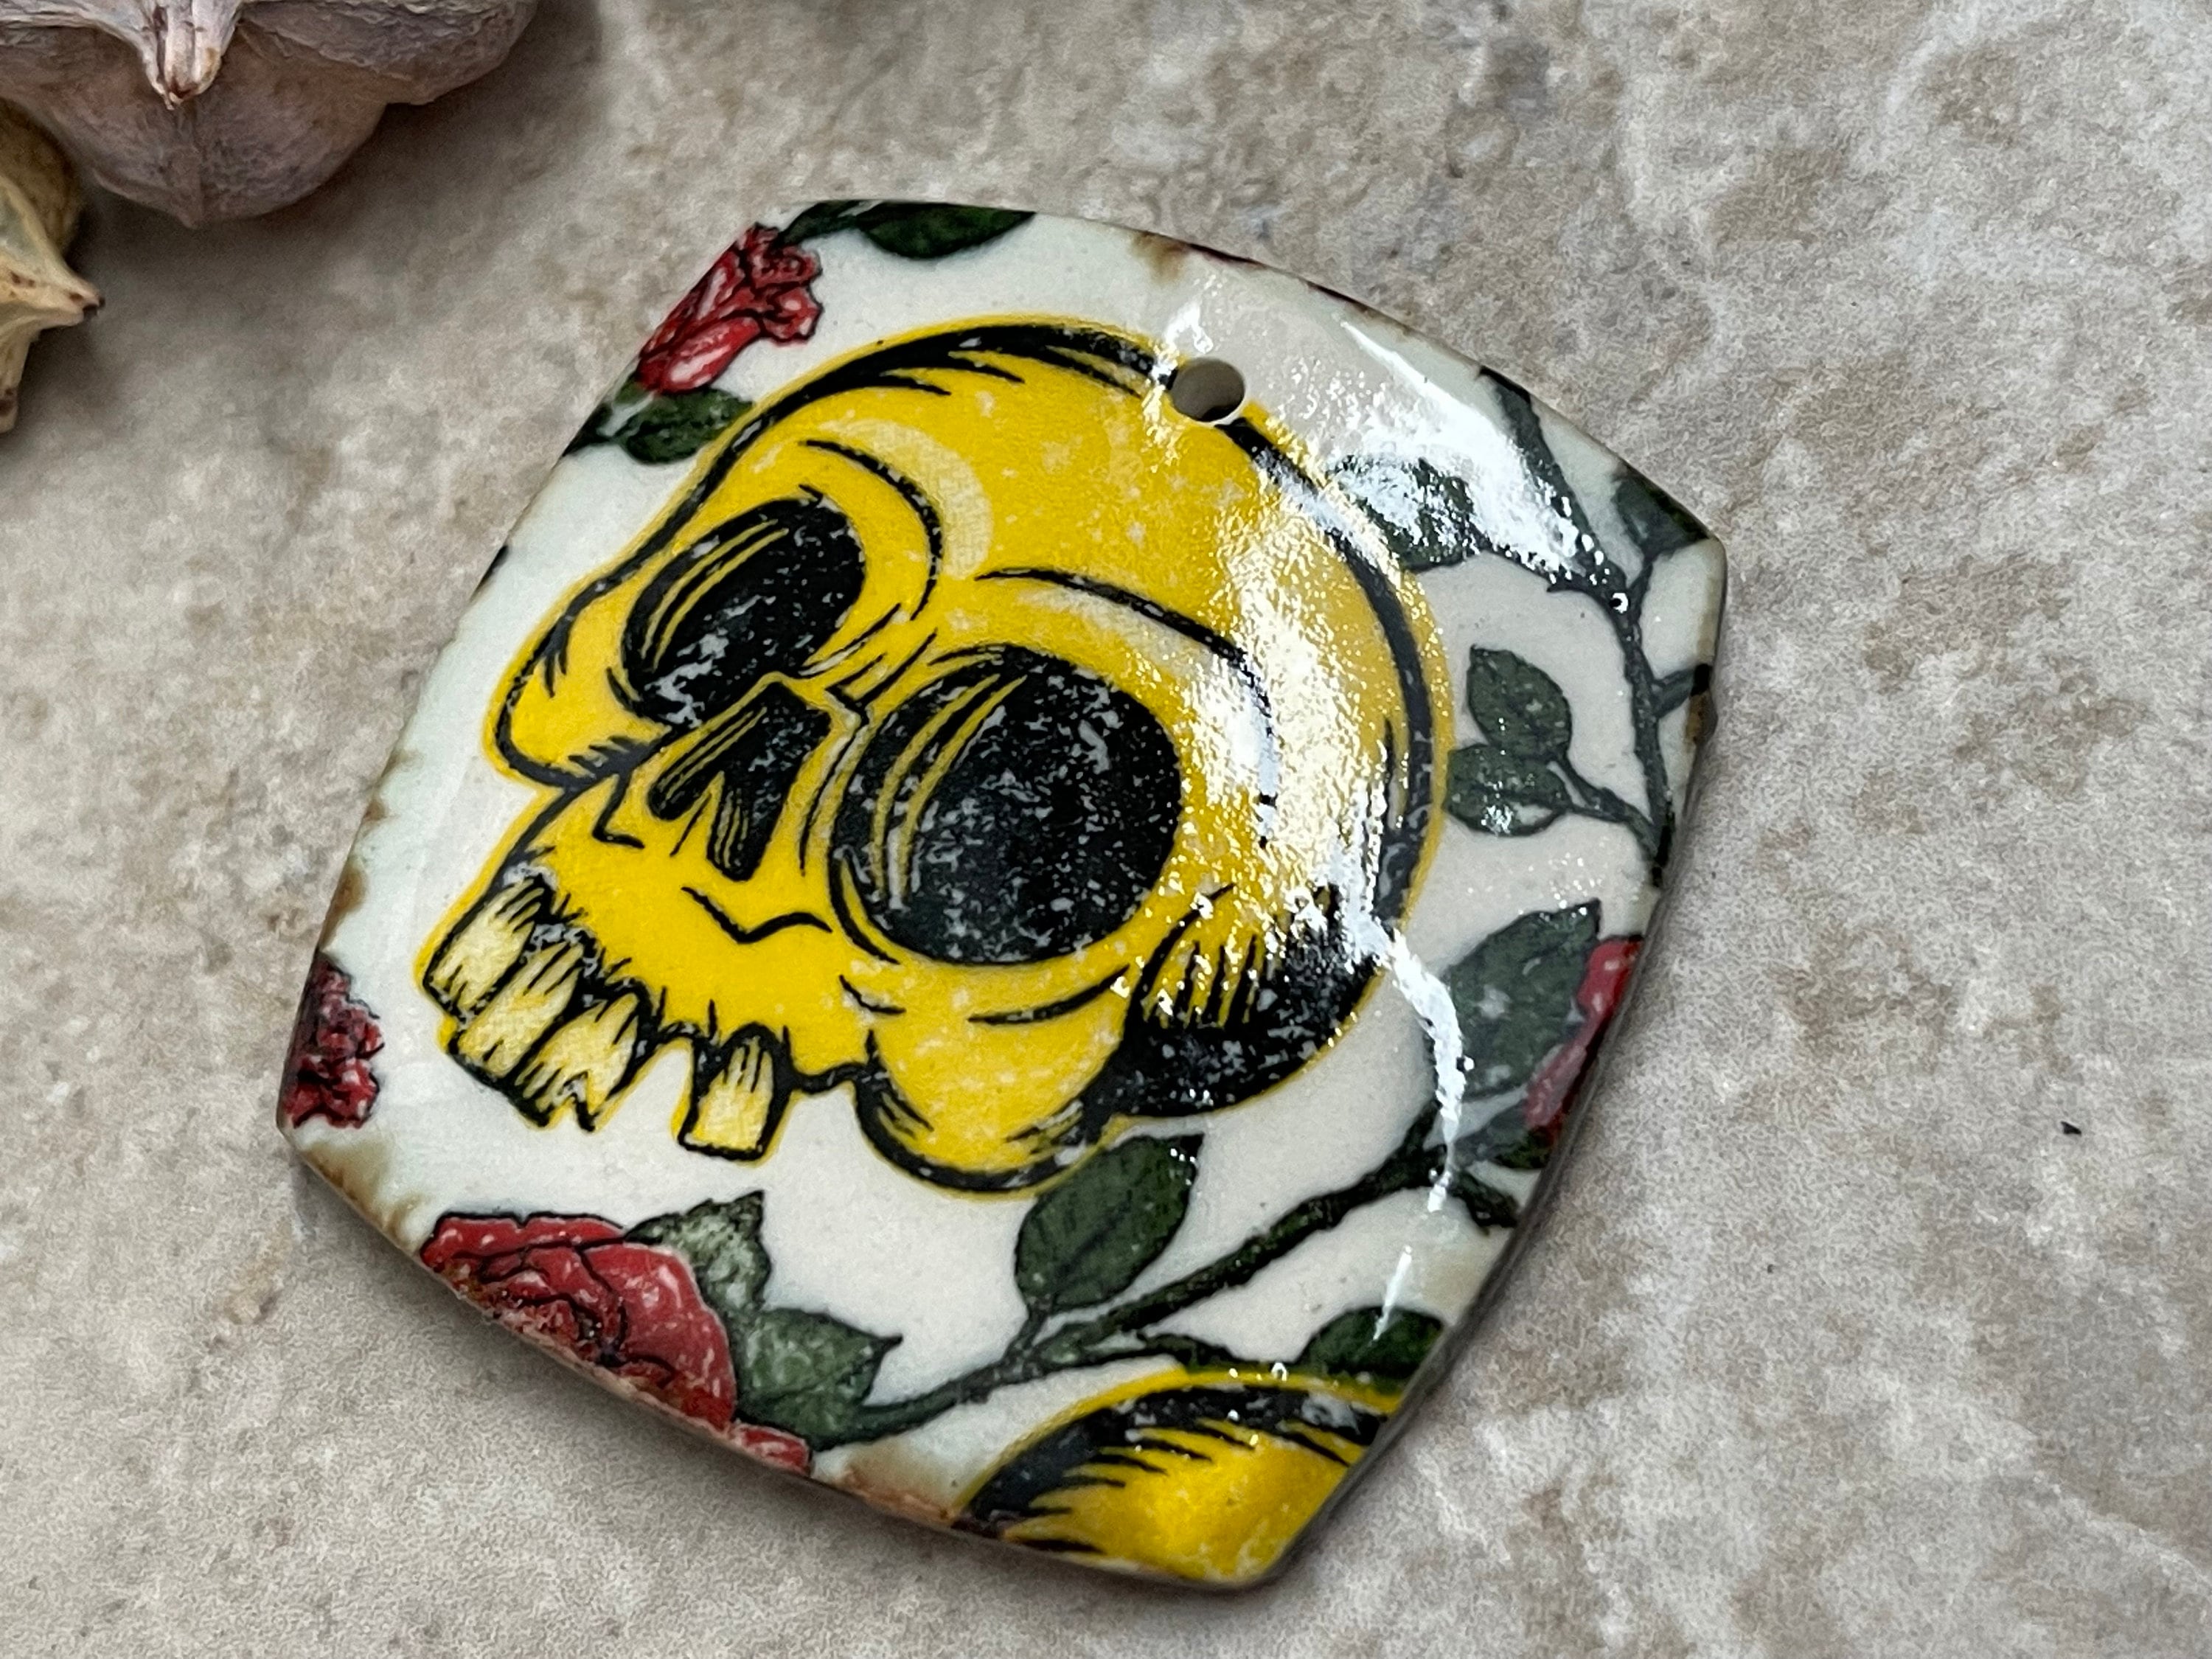 Skulls and Roses Pendant, Tattoo Style Pendant, Spooky Pendant, Gift for Her, Porcelain Pendant, Jewelry Making Components